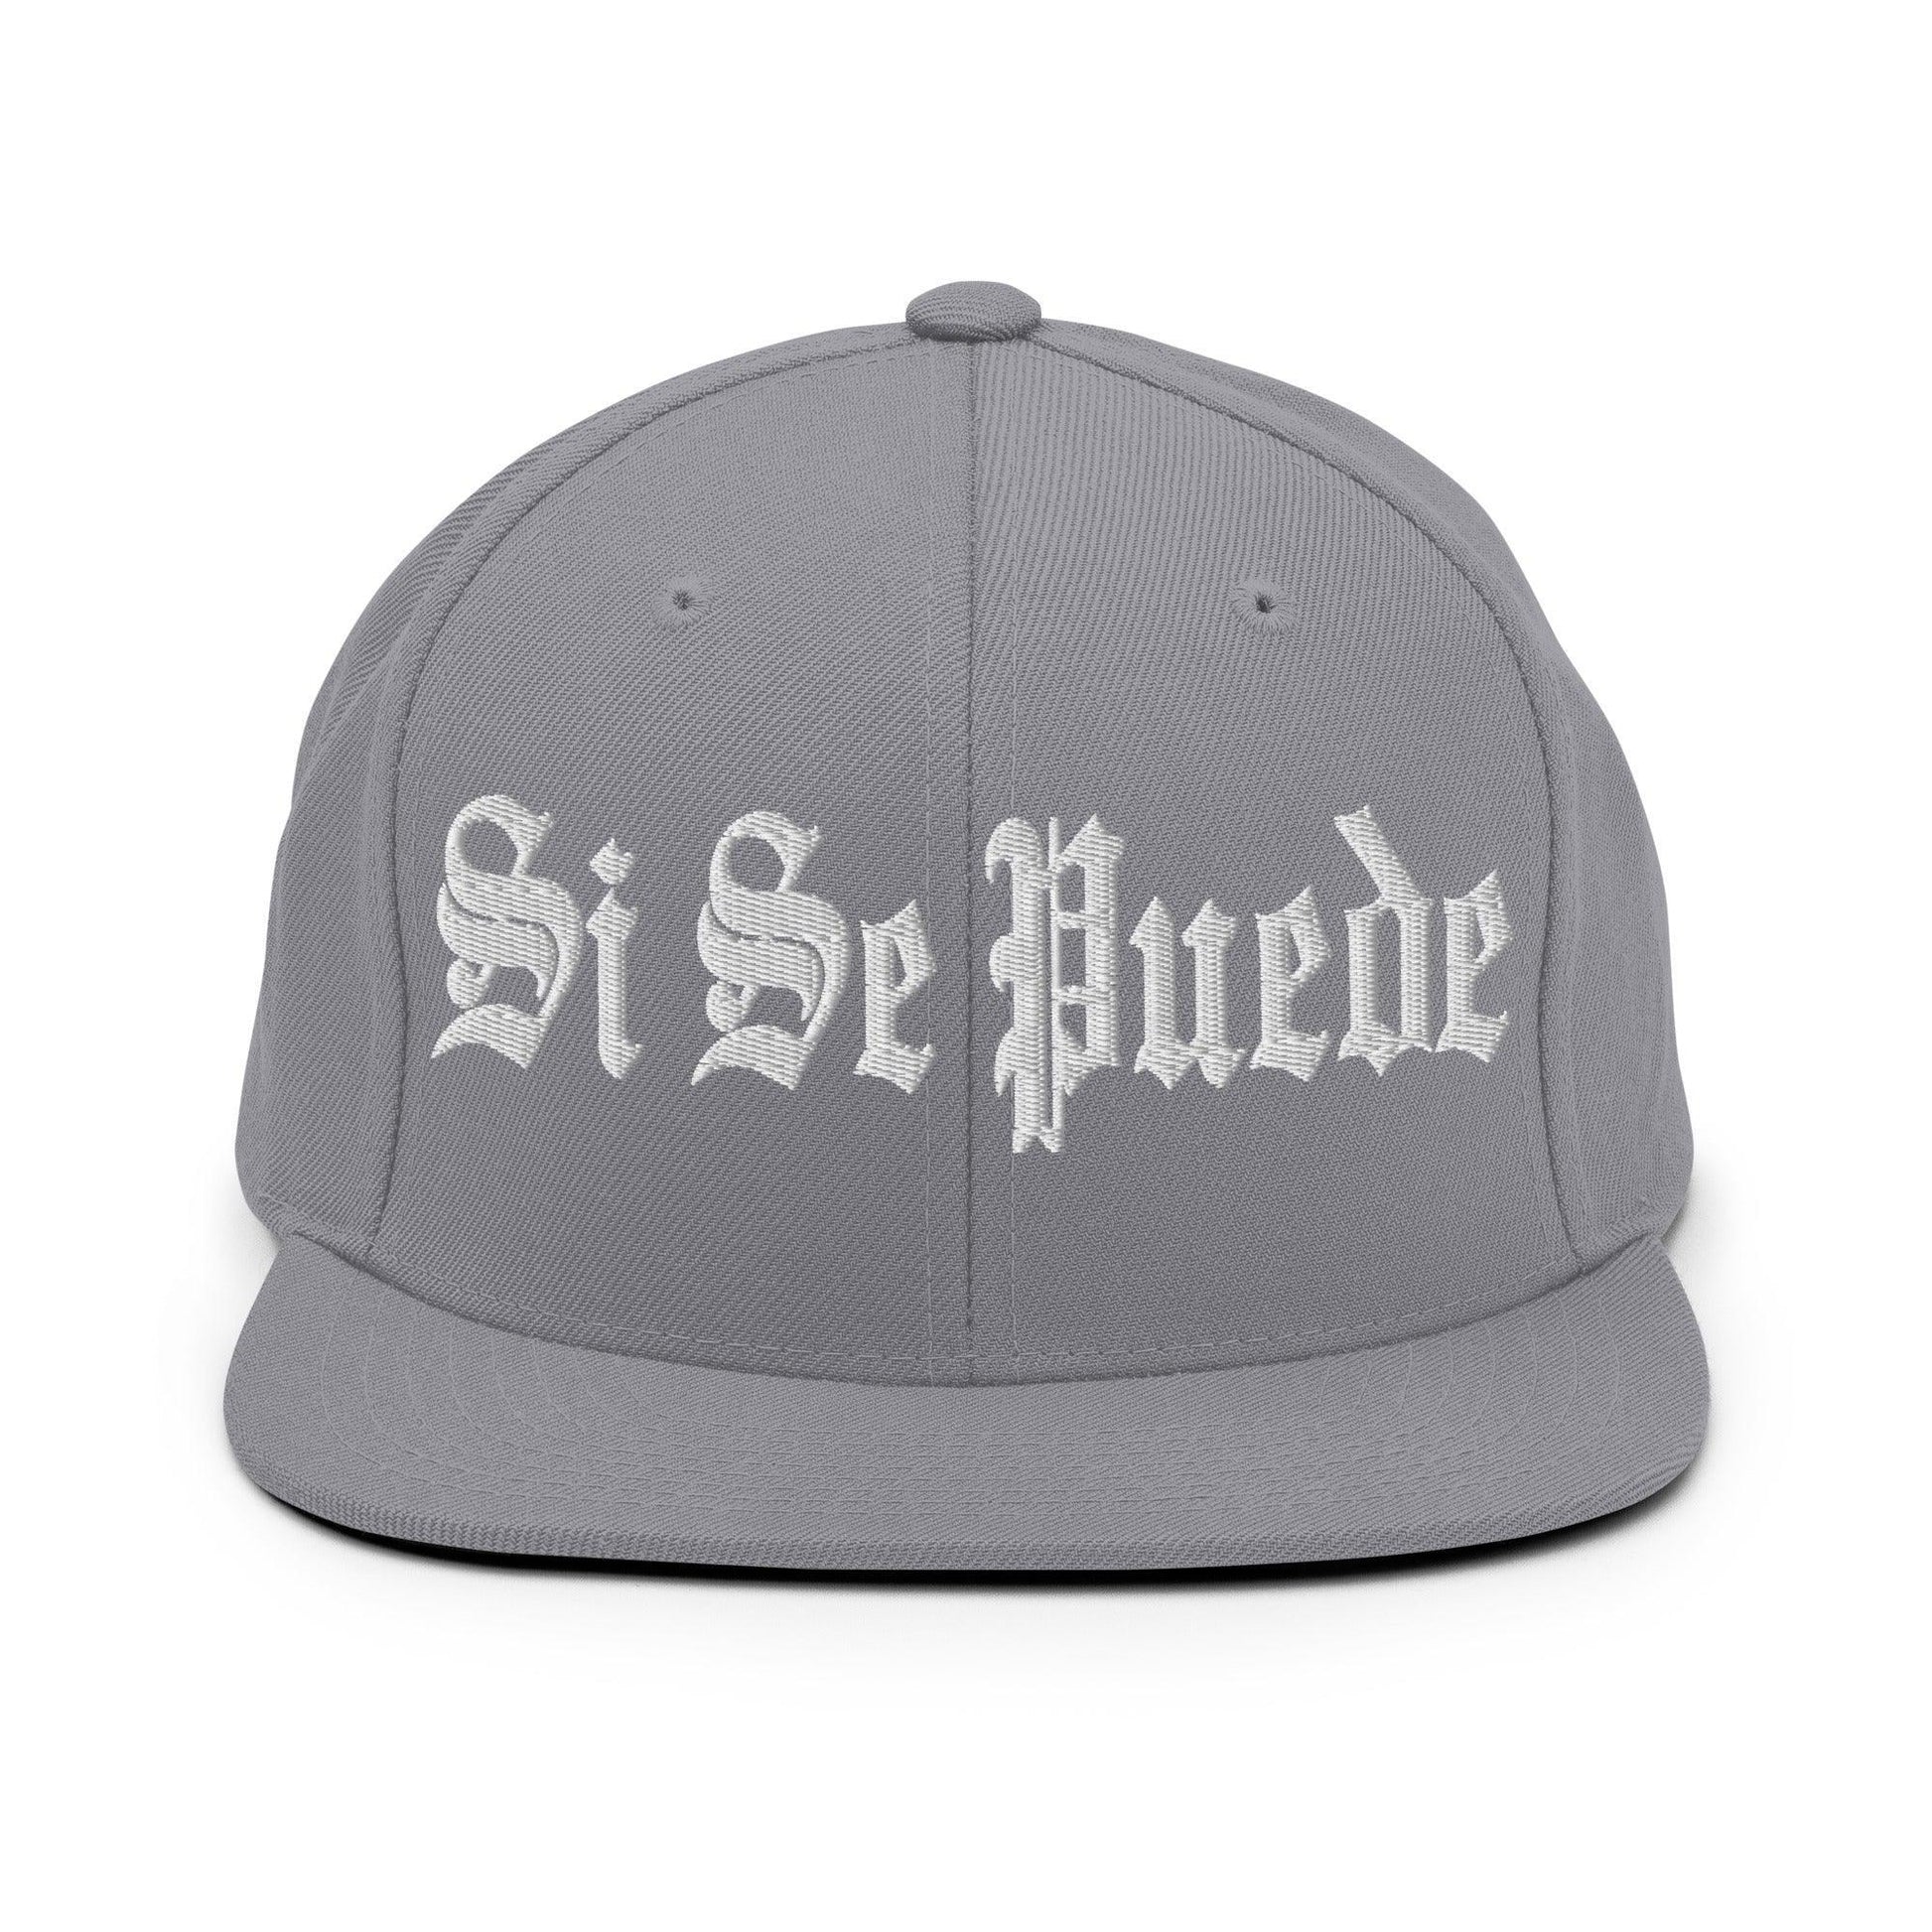 Si Se Puede Old English Snapback Hat Silver